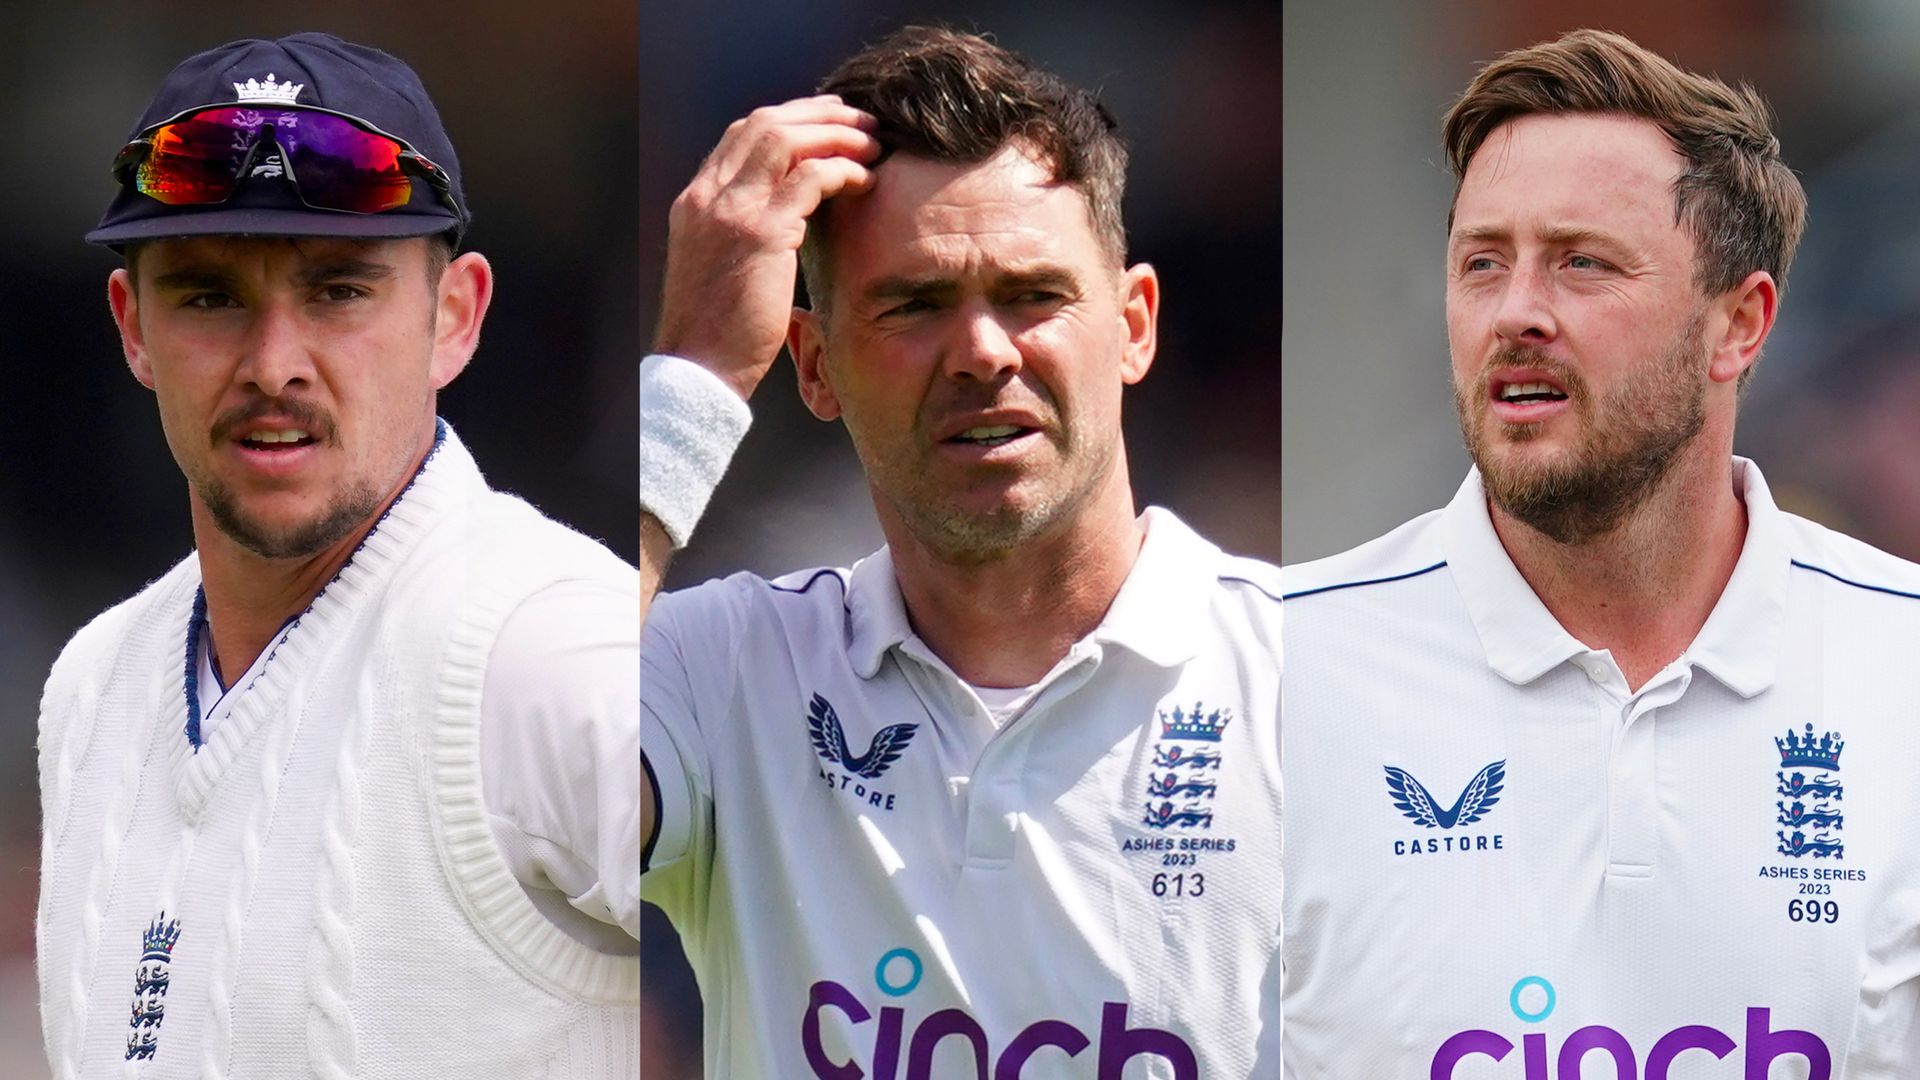 England name unchanged squad - but should Anderson play at The Oval?